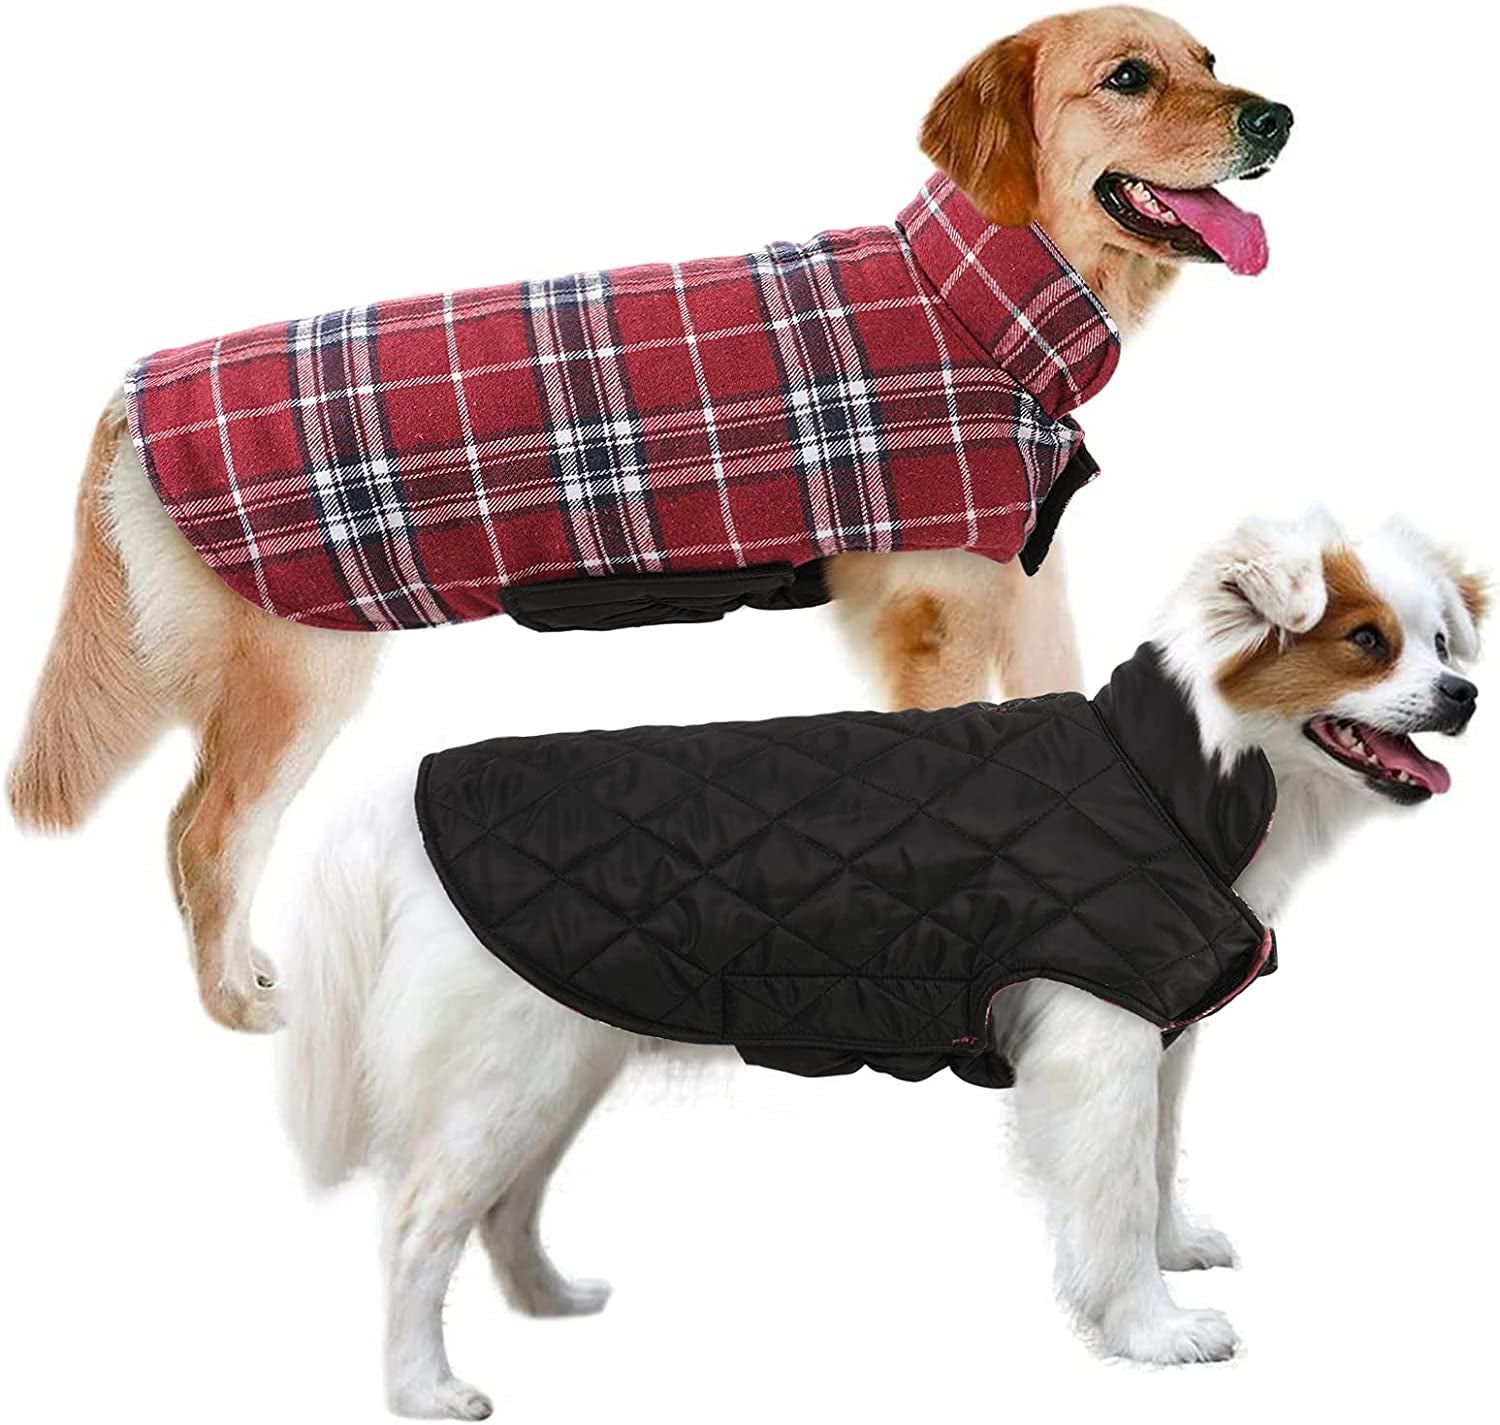 MIGOHI Dog Jackets for Winter Windproof Reversible Dog Coat for Cold Weather British Style Plaid Warm Dog Vest for Small Medium Large Dogs, Green XXL